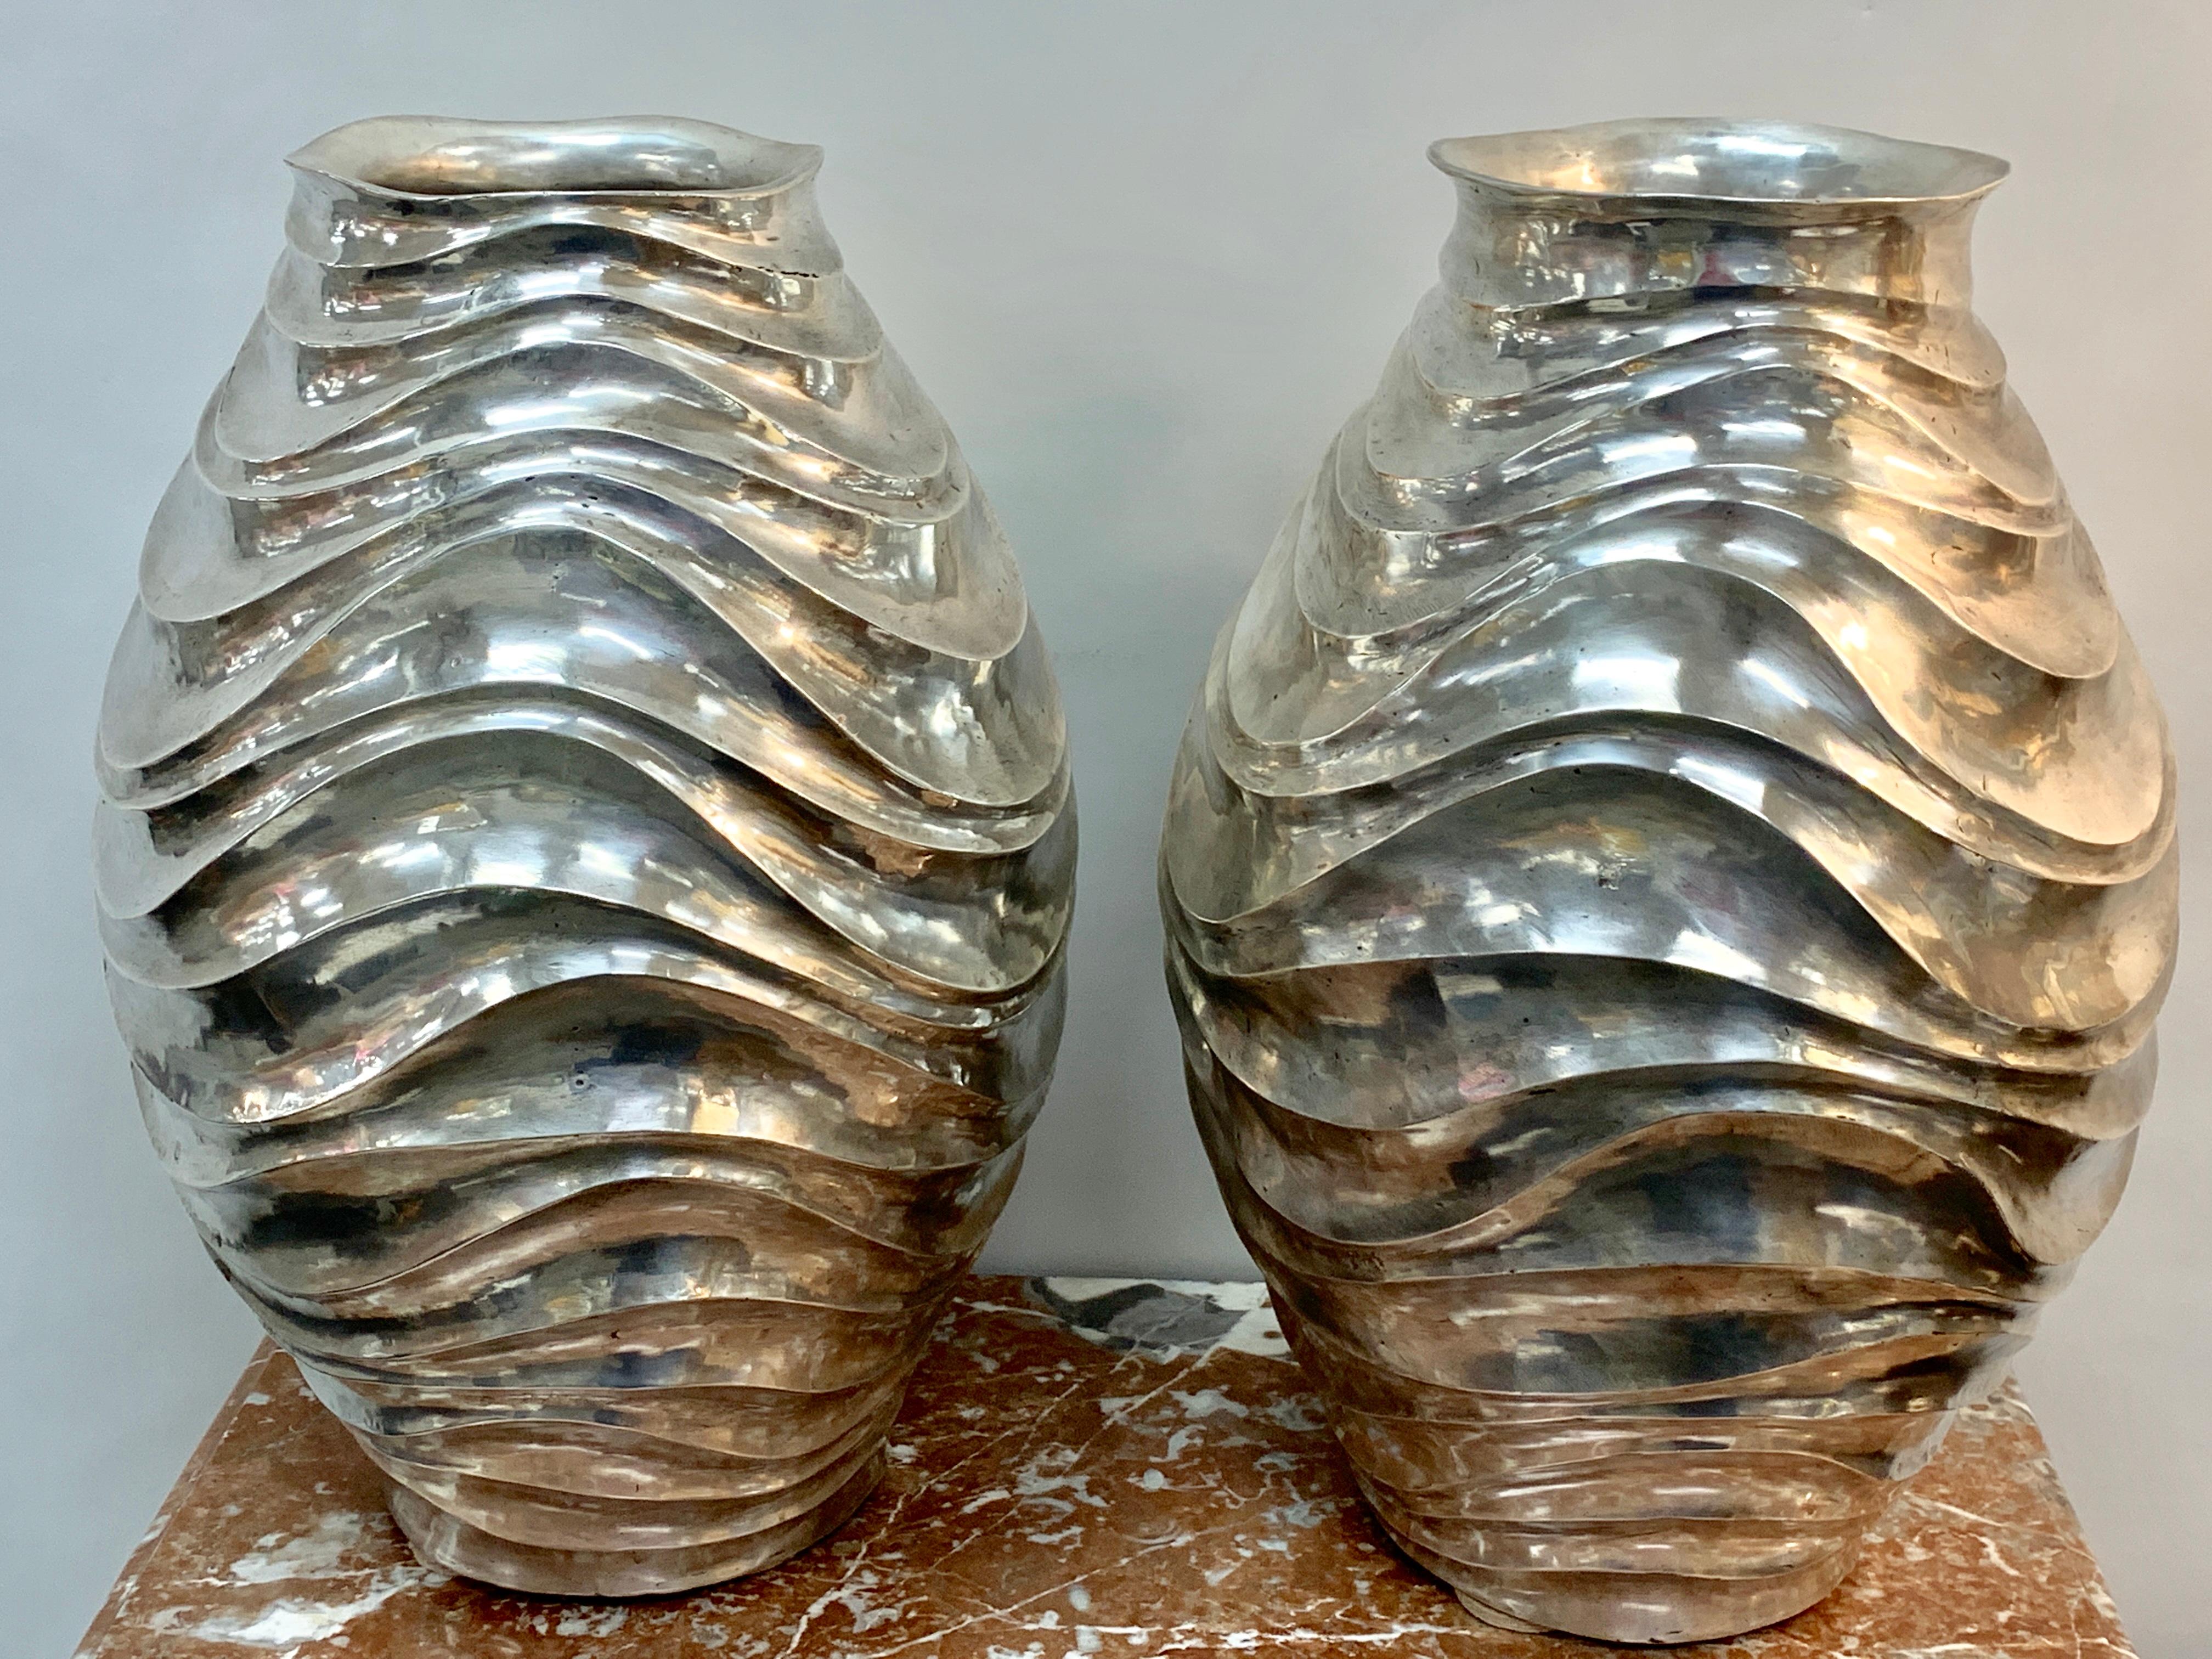 A Pair of French modern silver plated Vases, Each one handmade, chased with continuous undulating lines, each one bearing Artist signature in script 